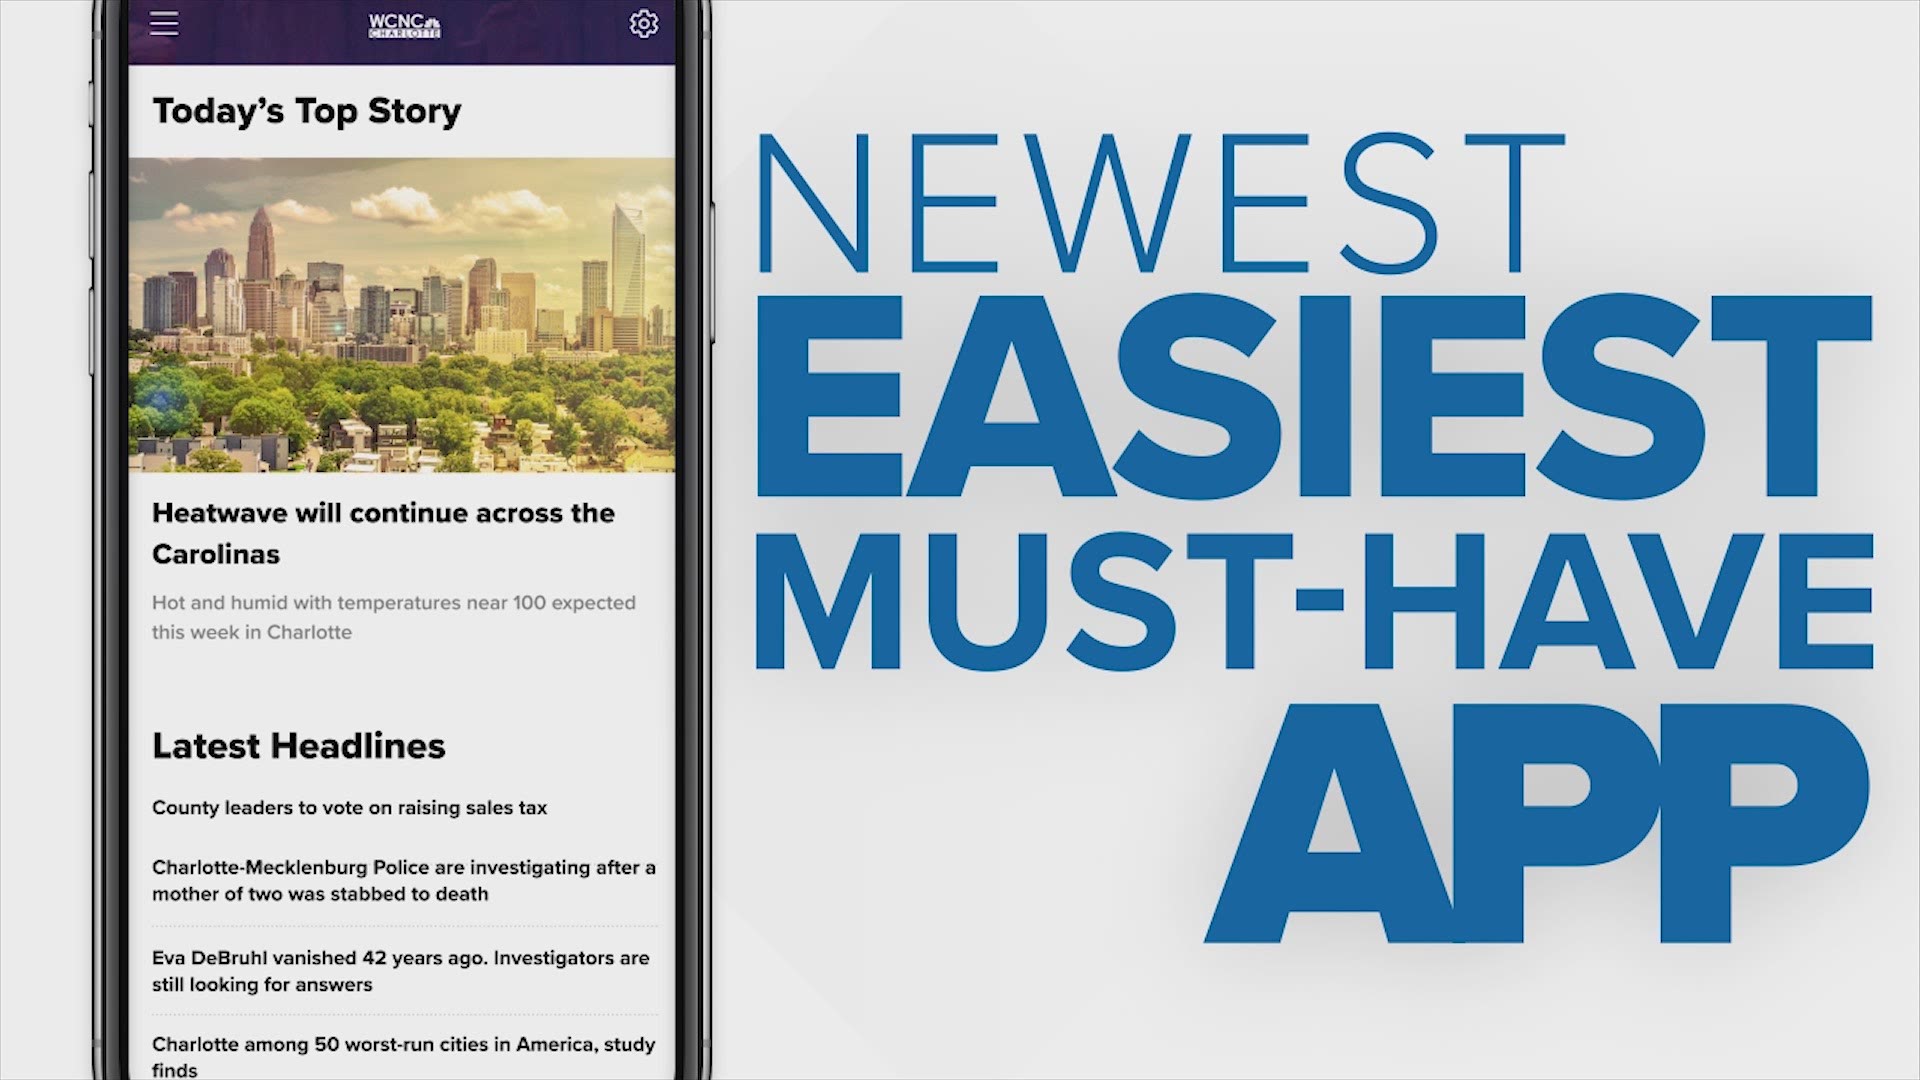 Download the new WCNC app today.